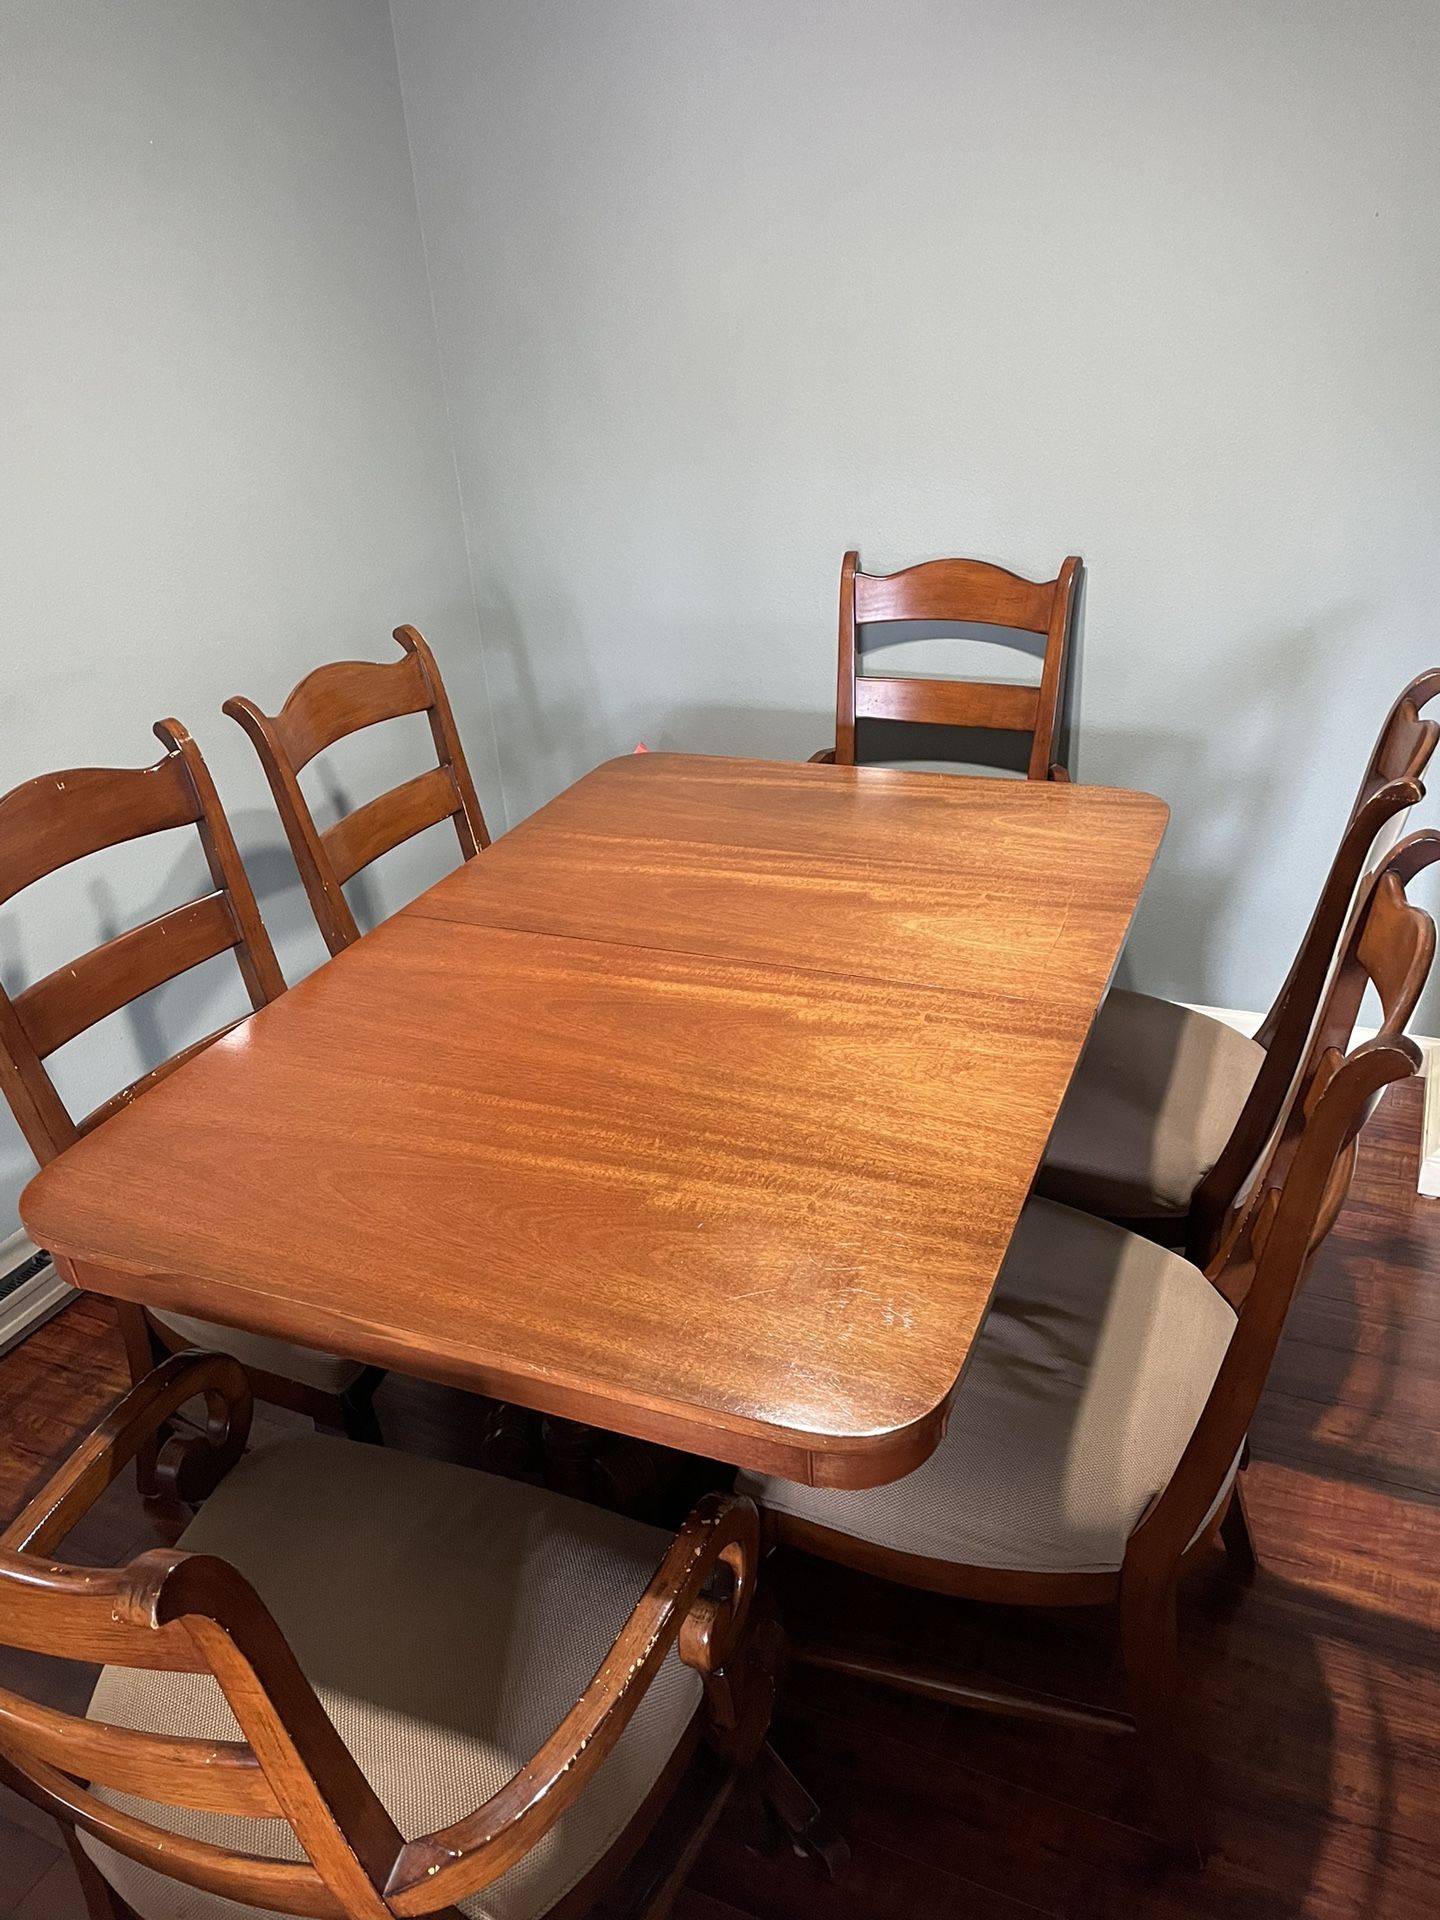 Duncan Phyfe 1930’s Table with chairs